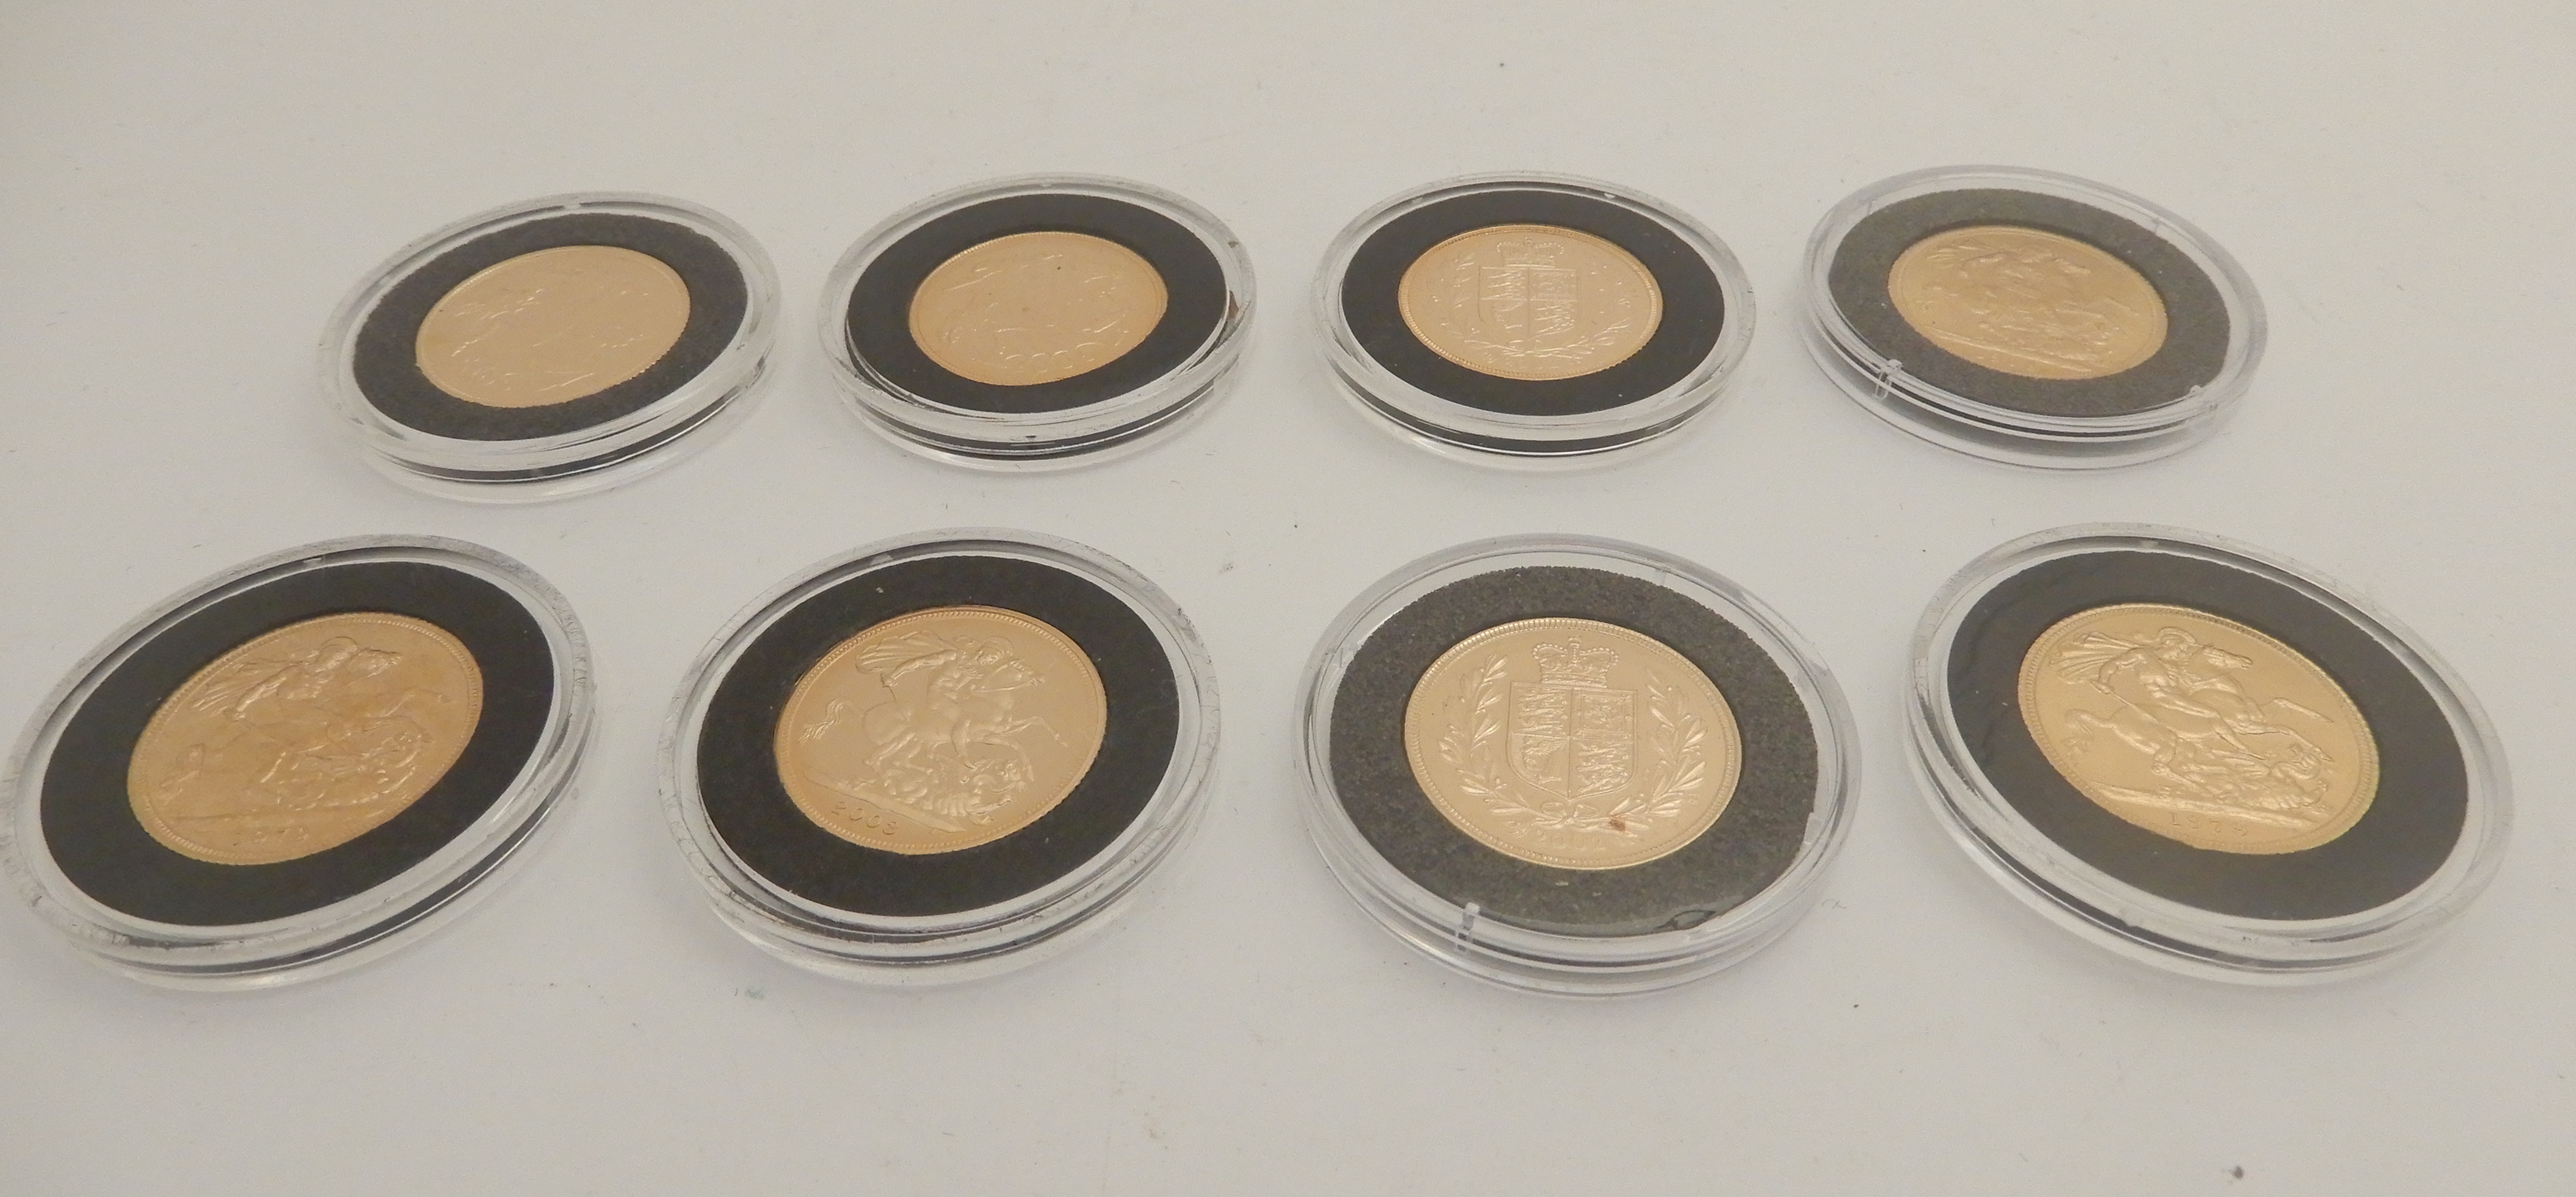 EIGHT QUEEN ELIZABETH II GOLD FULL SOVEREIGNS (ENCAPSULATED) 1968, 1979 (2), 2002 (2), 2003, 2005 (